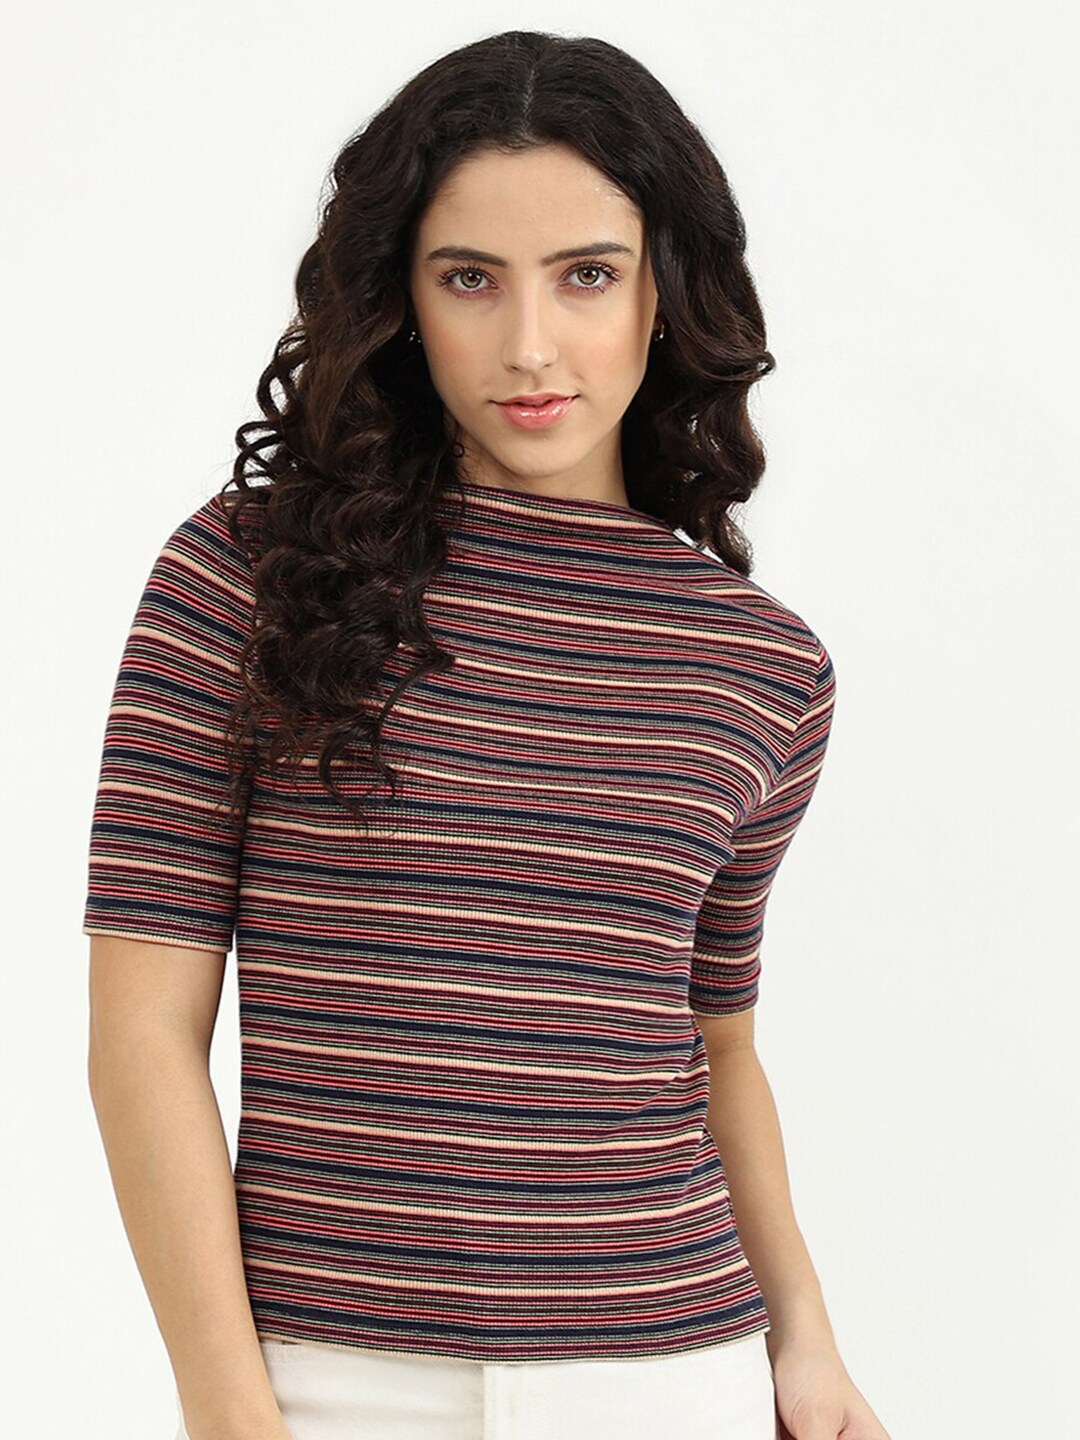 United Colors of Benetton Maroon & Mustard Yellow Boat Neck Stripe Top Price in India